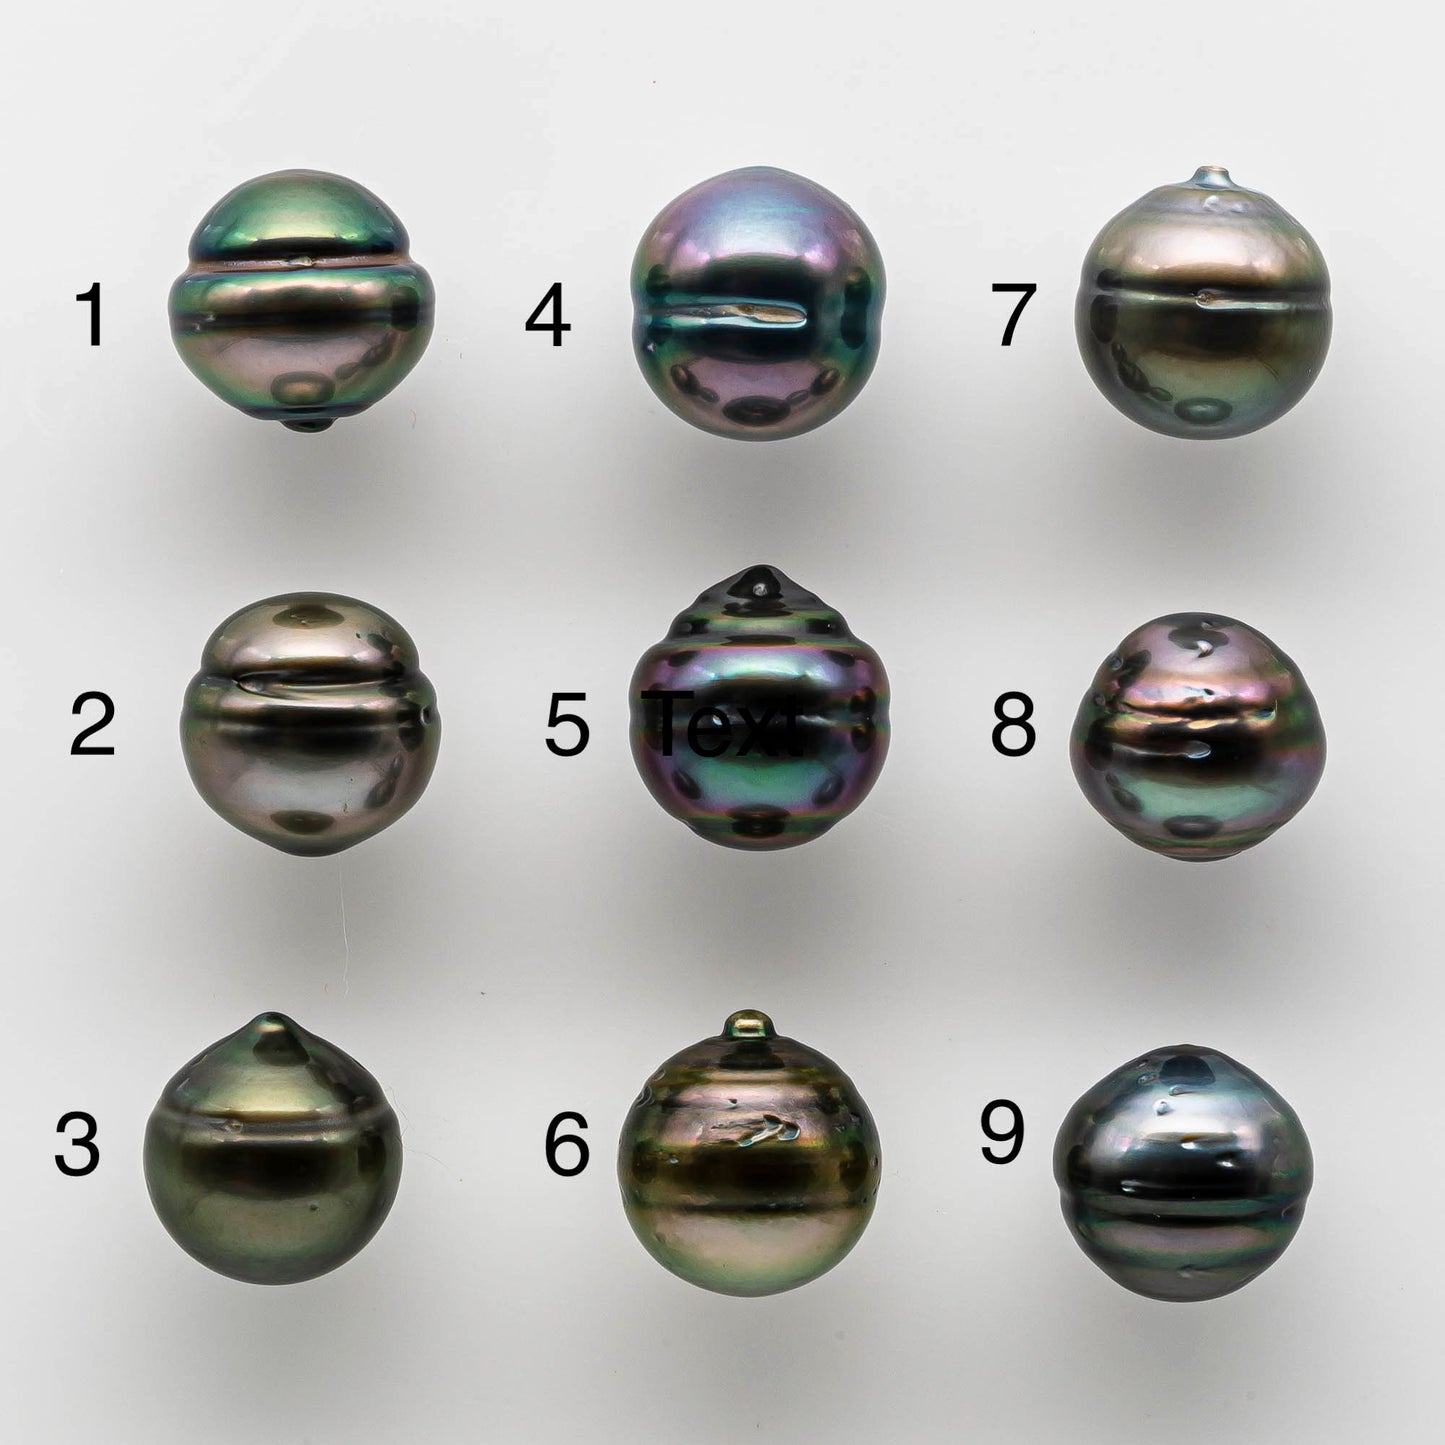 12-13mm Single Tahitian Pearl Bead Drop Undrilled in High Luster and Natural Color, Half or Full Drilled to Large Hole, SKU # 1657TH